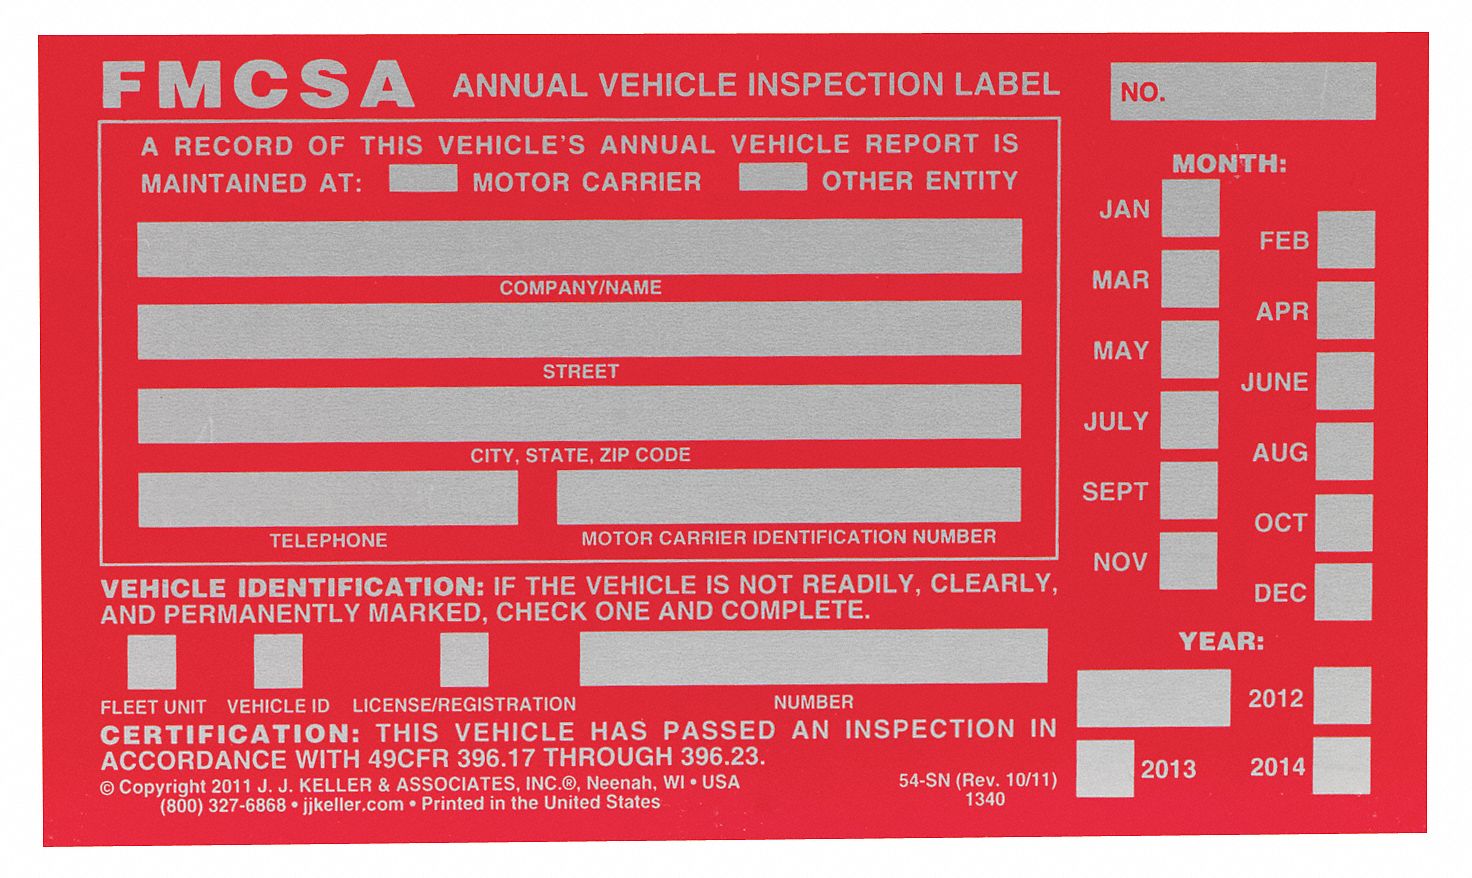 35 Fmcsa Annual Vehicle Inspection Label Placement - Labels For You